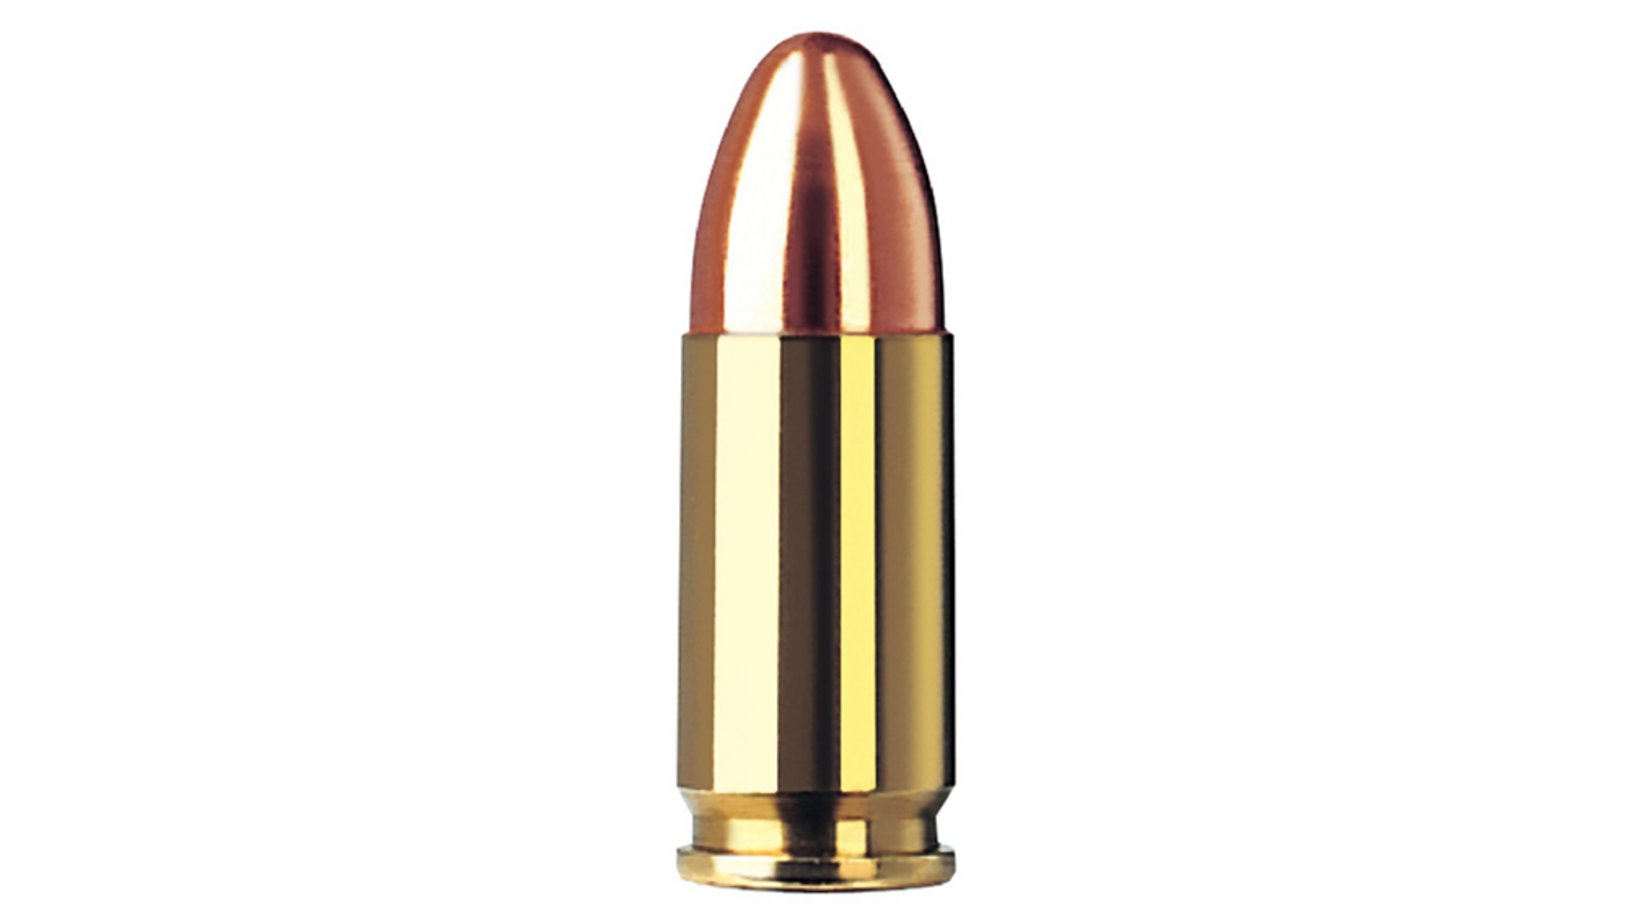 Single bullet view of GECO 9 mm Luger Encapsulated Full Metal Jacket 8,0g